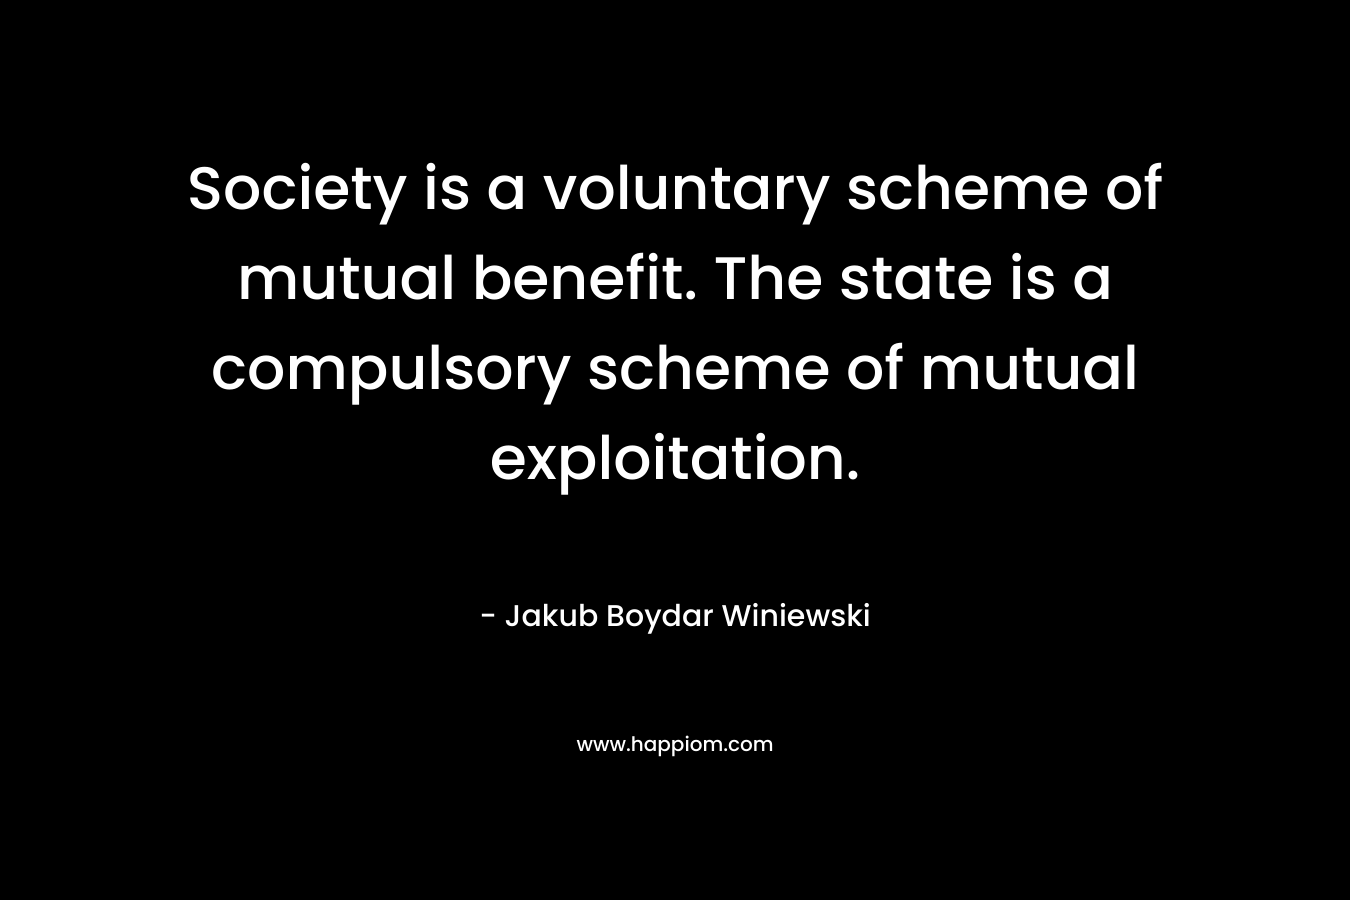 Society is a voluntary scheme of mutual benefit. The state is a compulsory scheme of mutual exploitation.